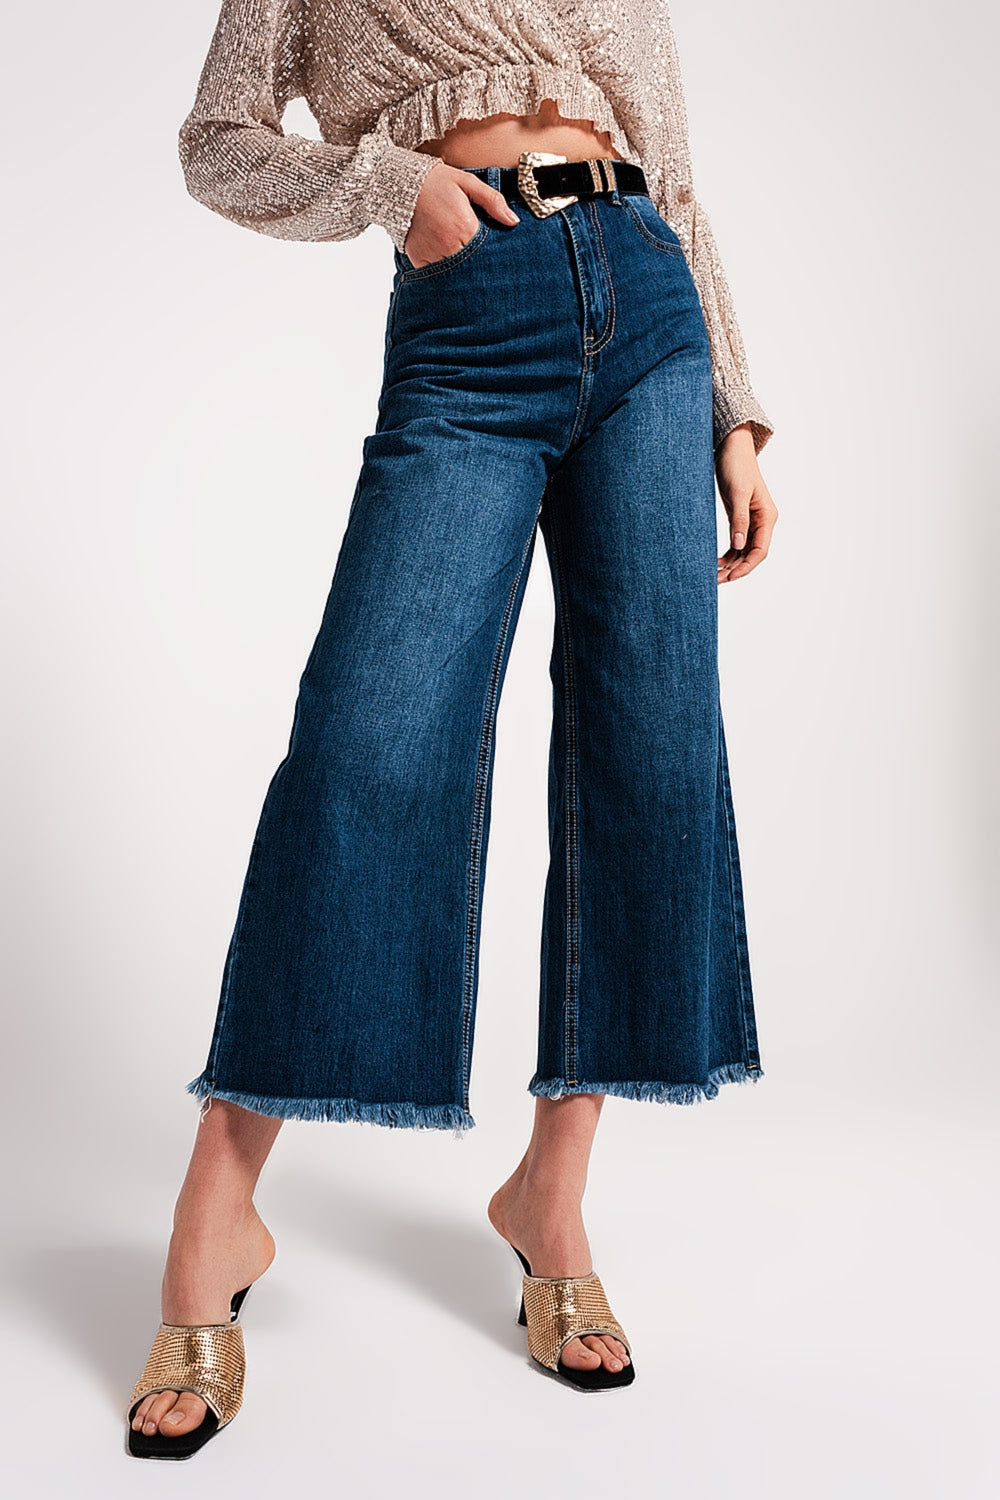 Q2 Fray hem Cropped jeans in blue